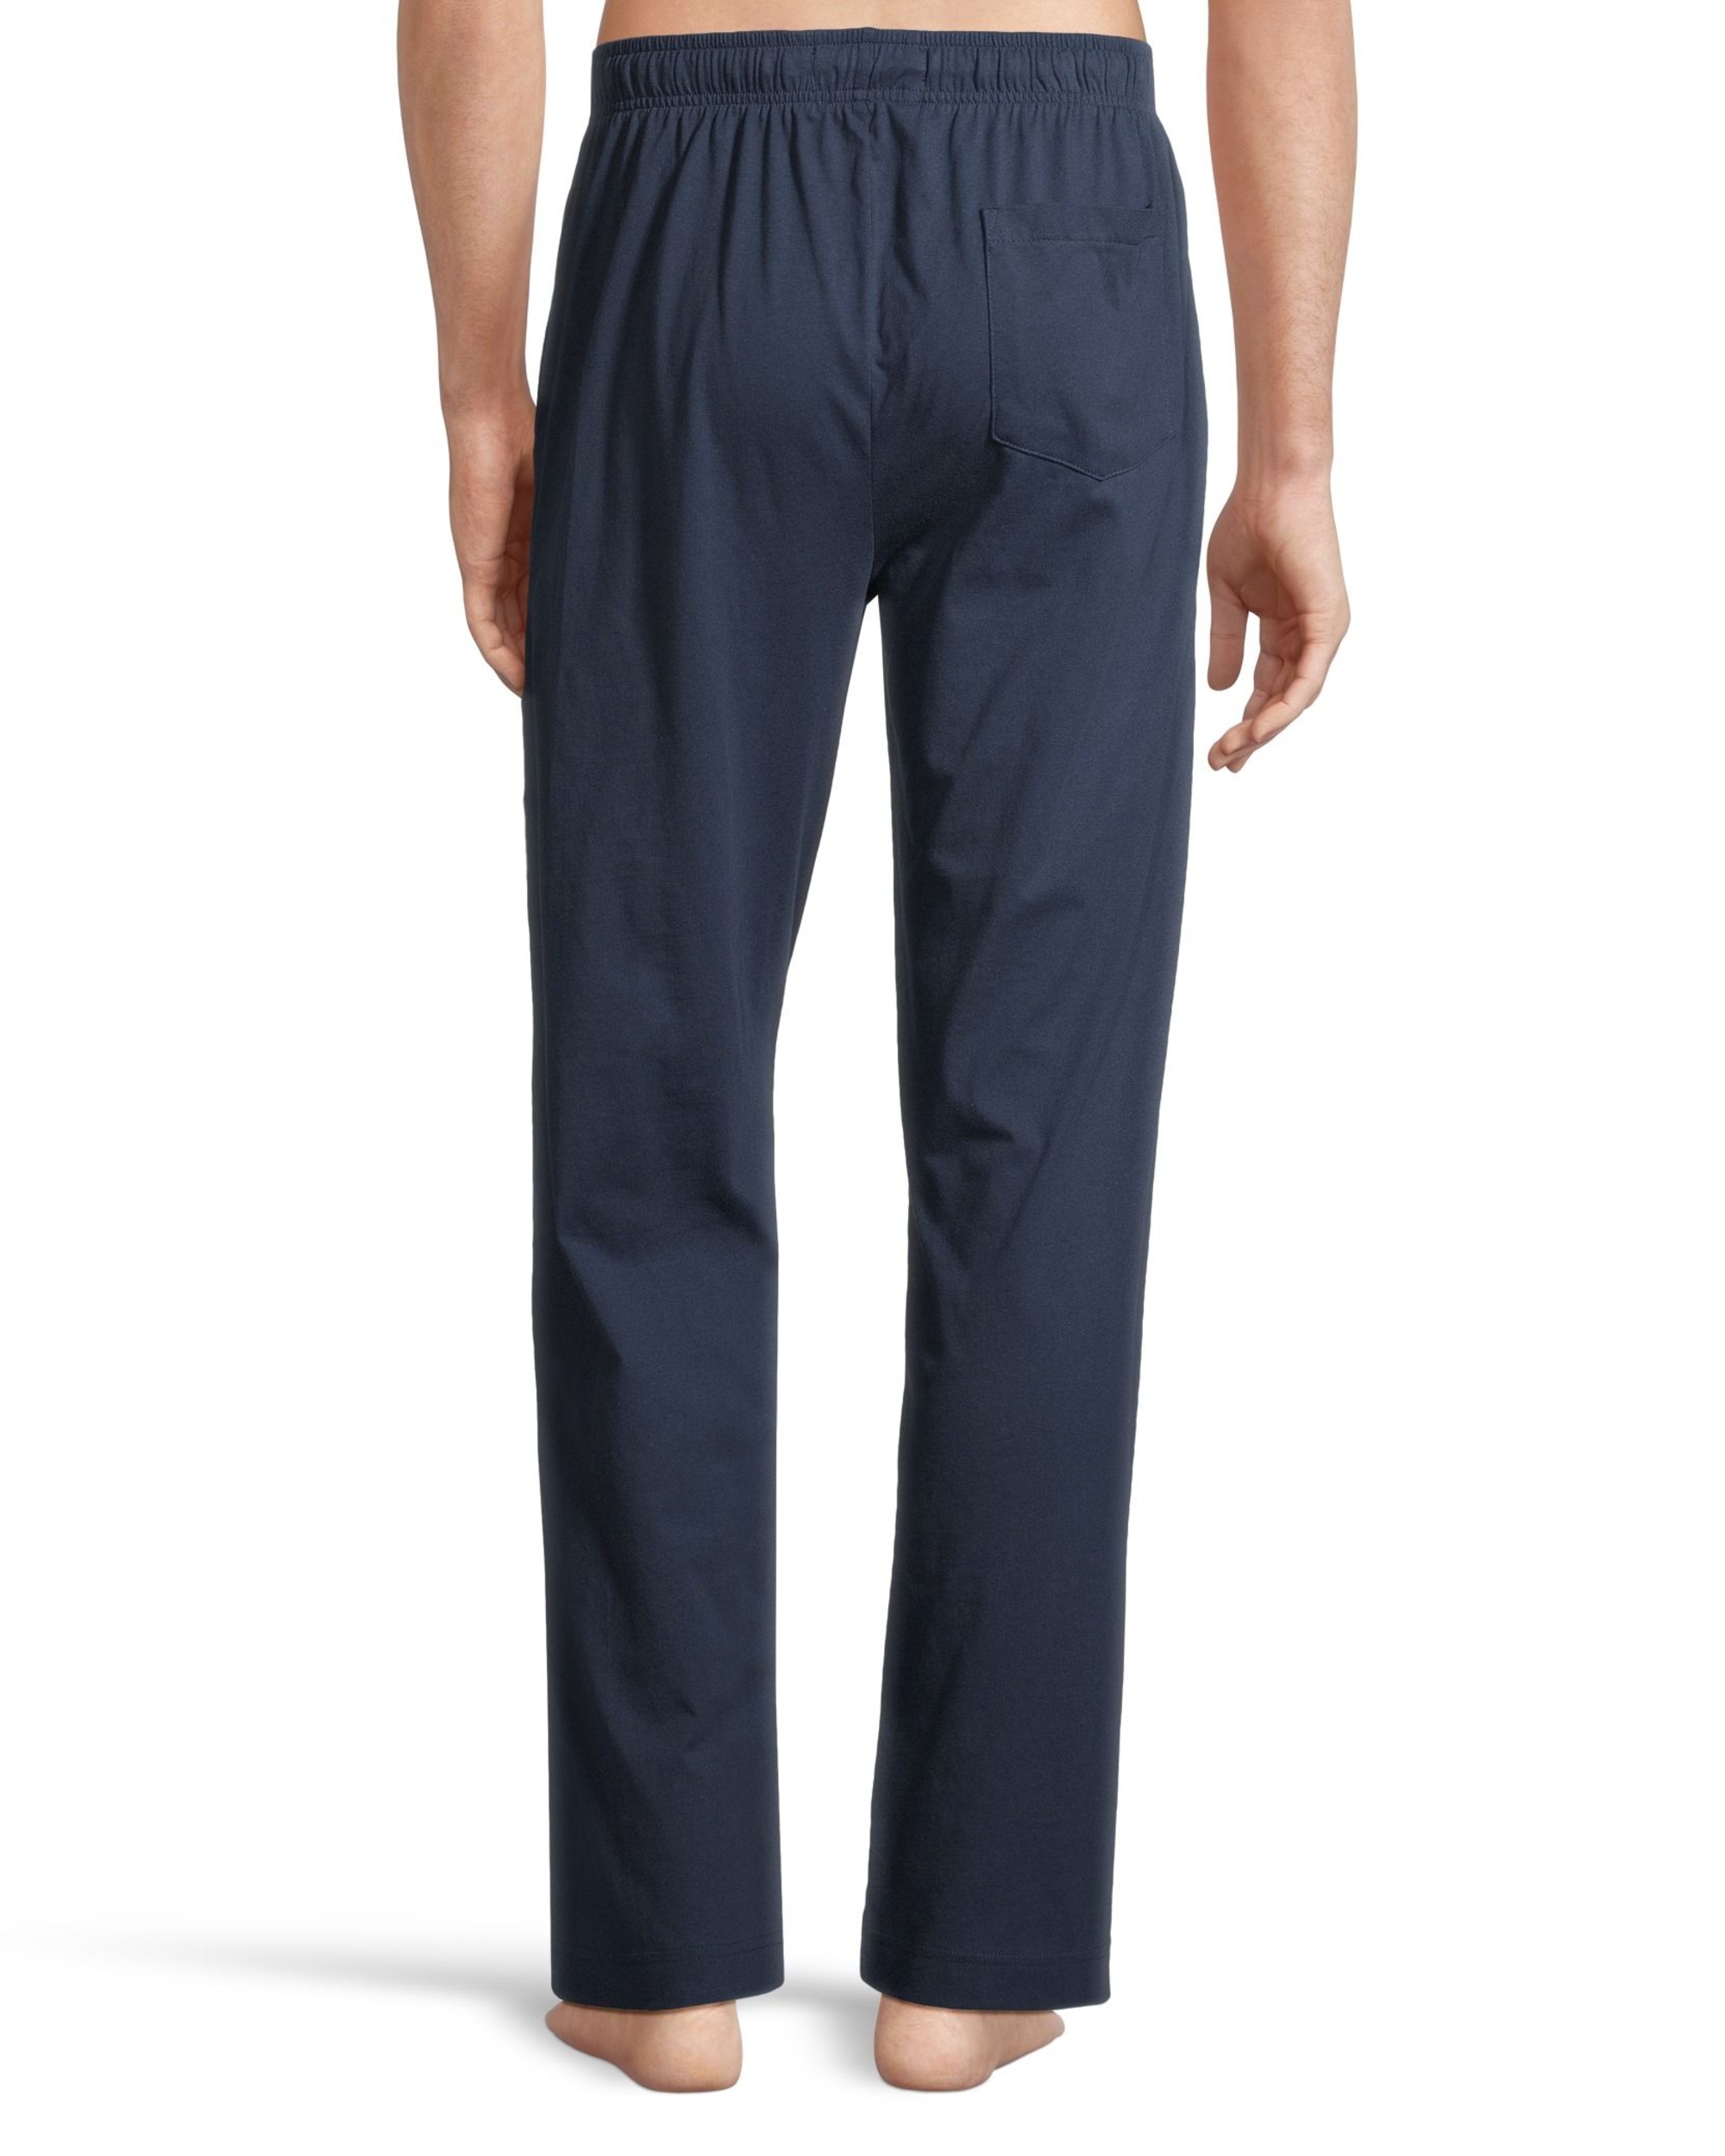 Men's Jersey Lounge Pants With Elastic Waistband and Drawstring | Marks